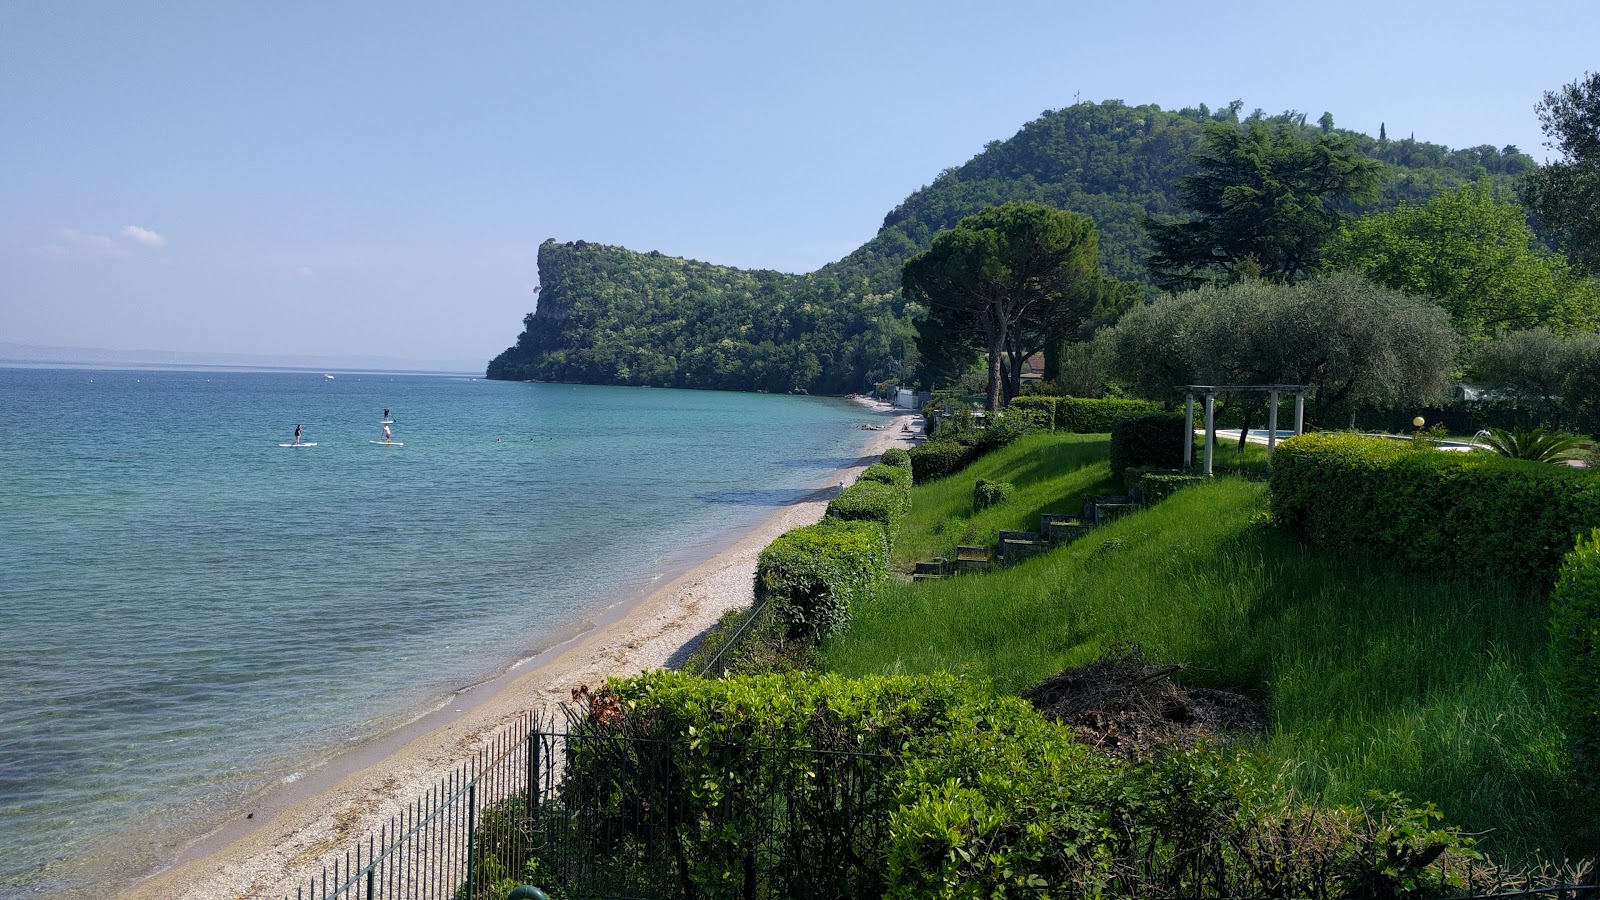 Photo of Spiaggia Pisenze and its beautiful scenery